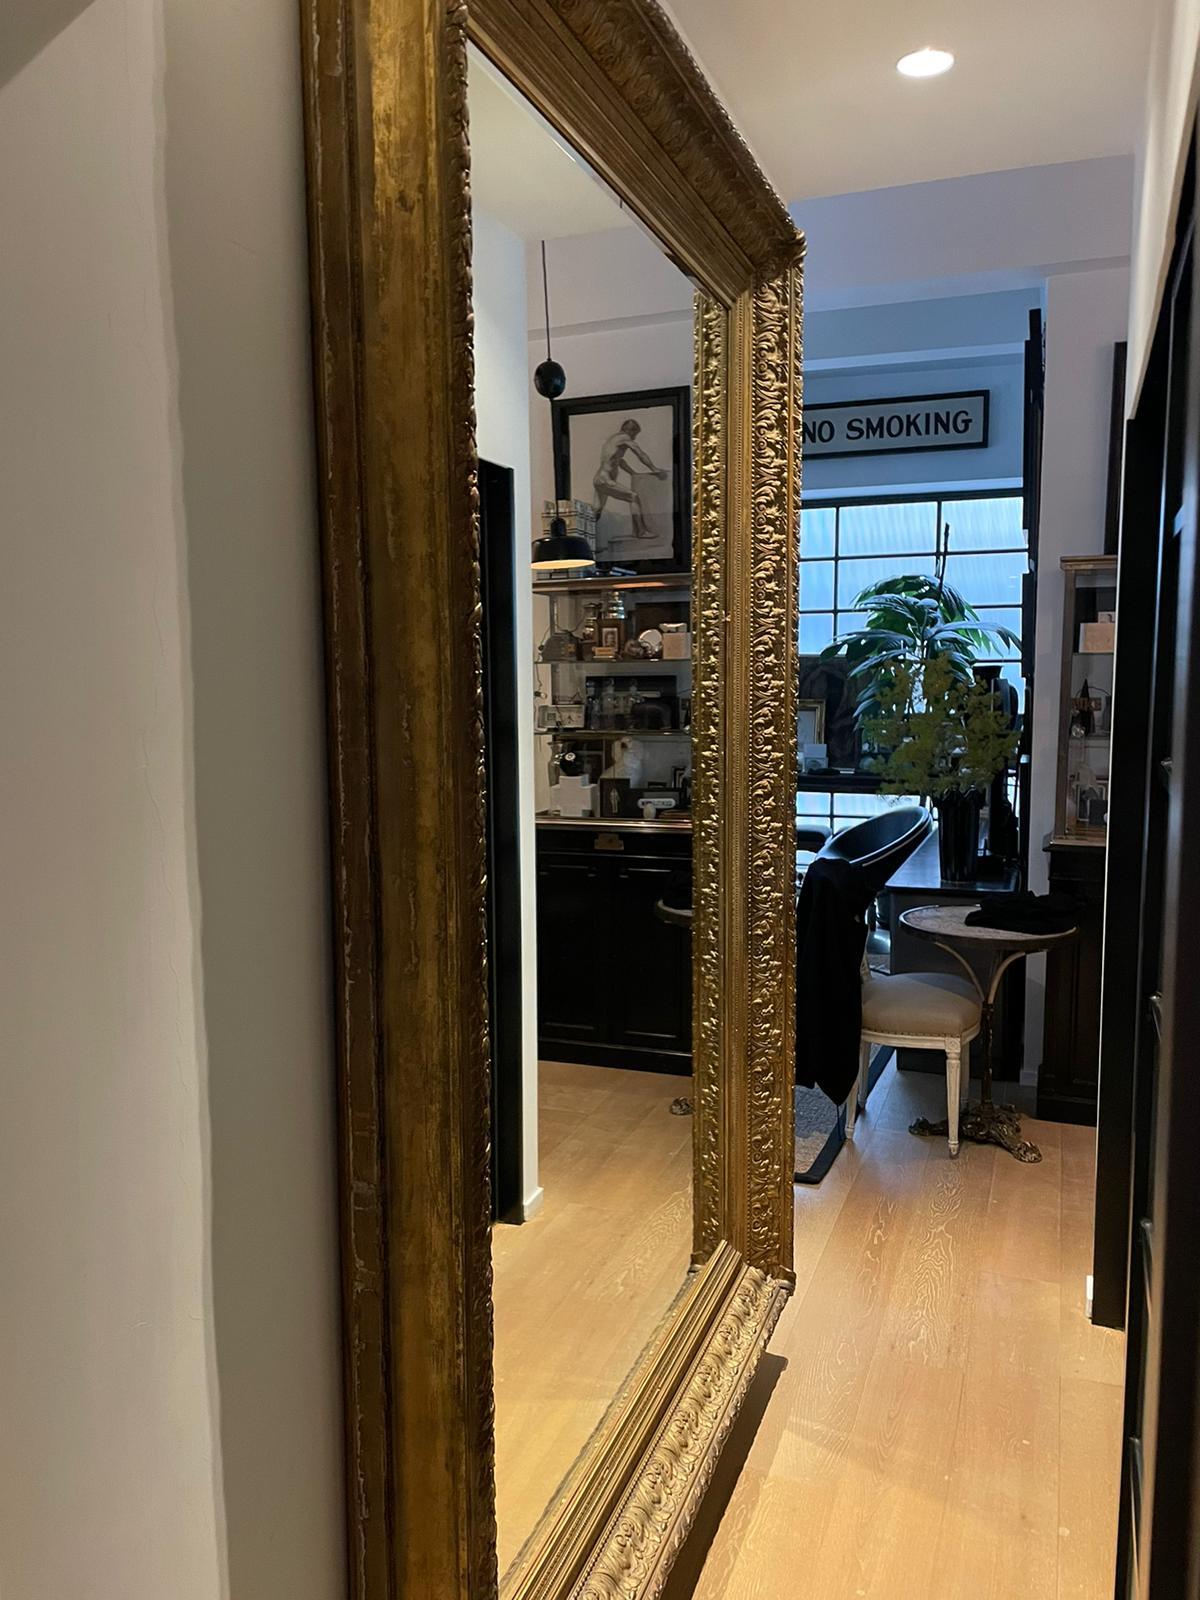 Incredible European Extra Large Frame 
circa 1900
made of wood, plaster and gilt gold details
Plaster work has been restored but there is one small recent chip
Currently wall mounted but would also be a great leaner given its size.

The